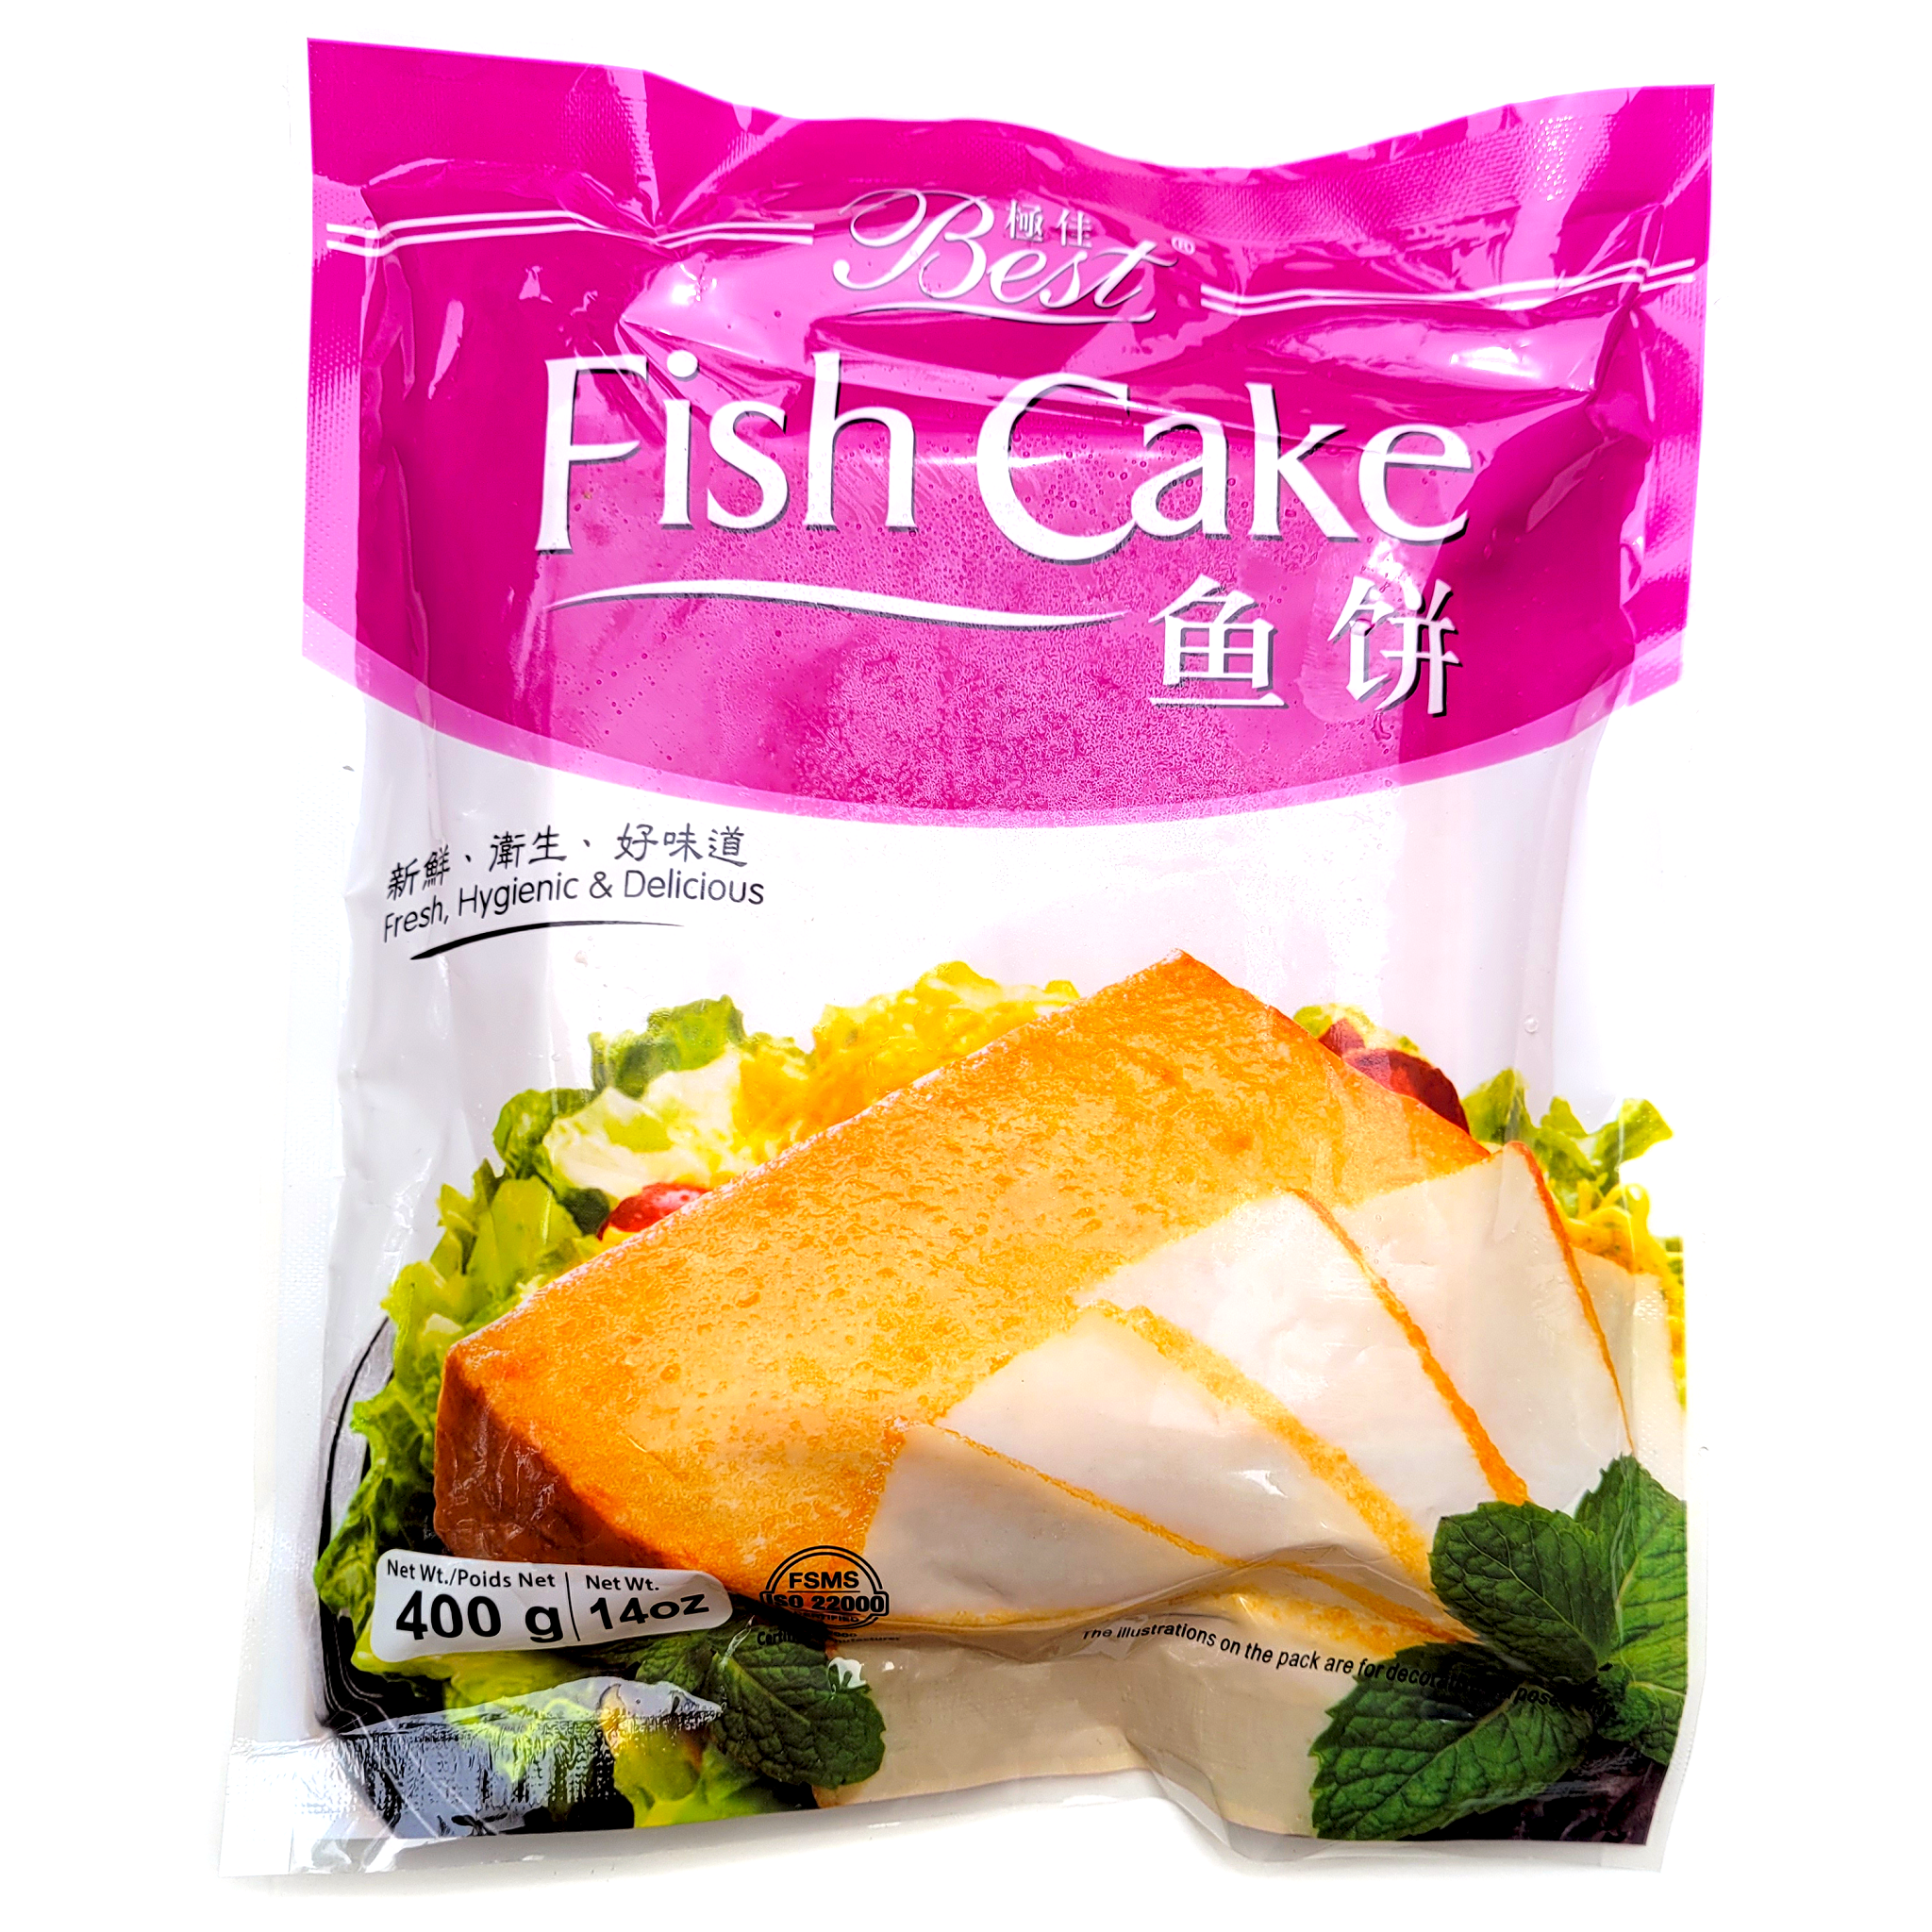 EB Frozen Food - The Leading Frozen Food Supplier in Malaysia